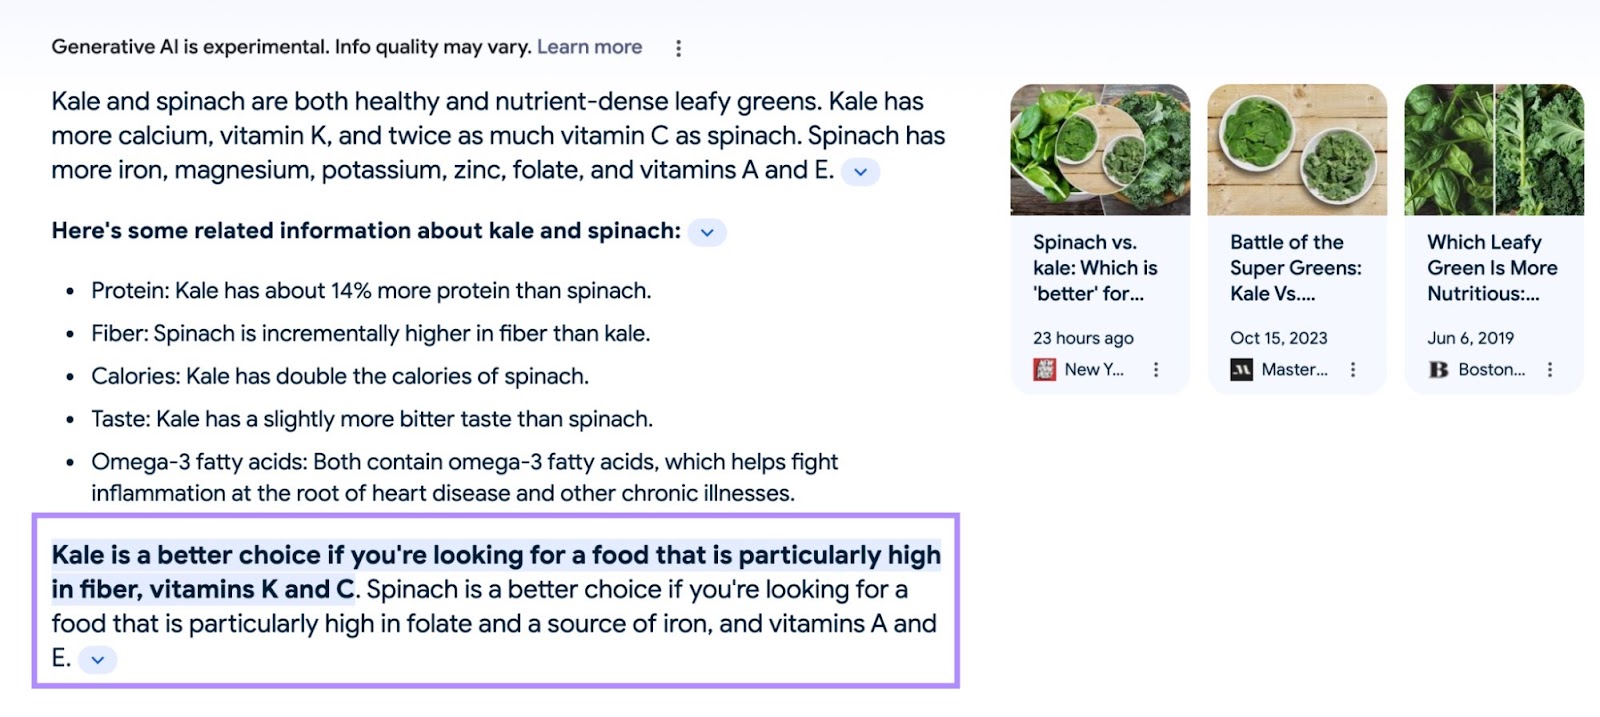 A SERP comparing kale and spinach